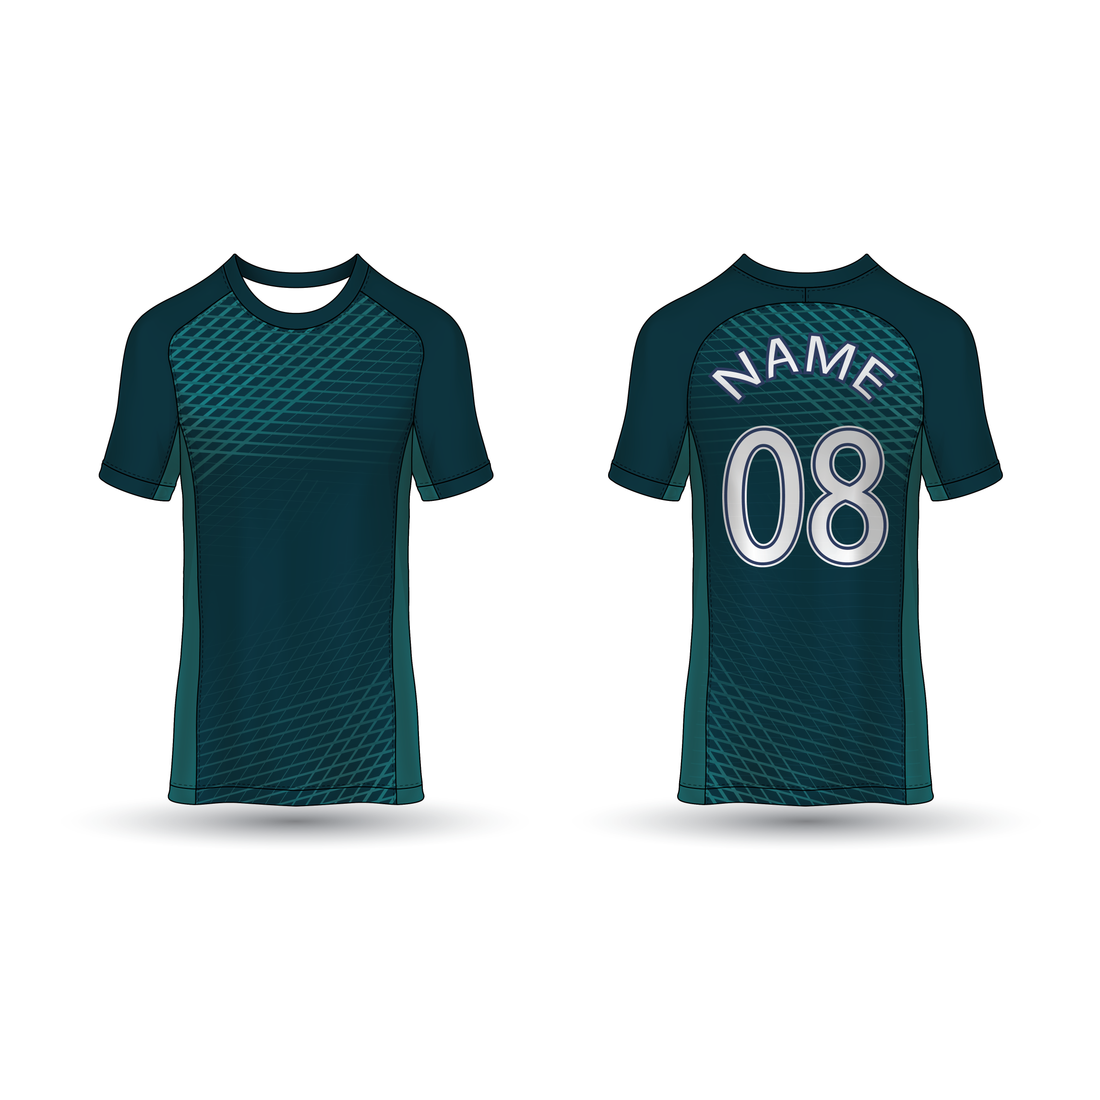 NEXT PRINT All Over Printed Customized Sublimation T-Shirt Unisex Sports Jersey Player Name & Number, Team Name NP50000262